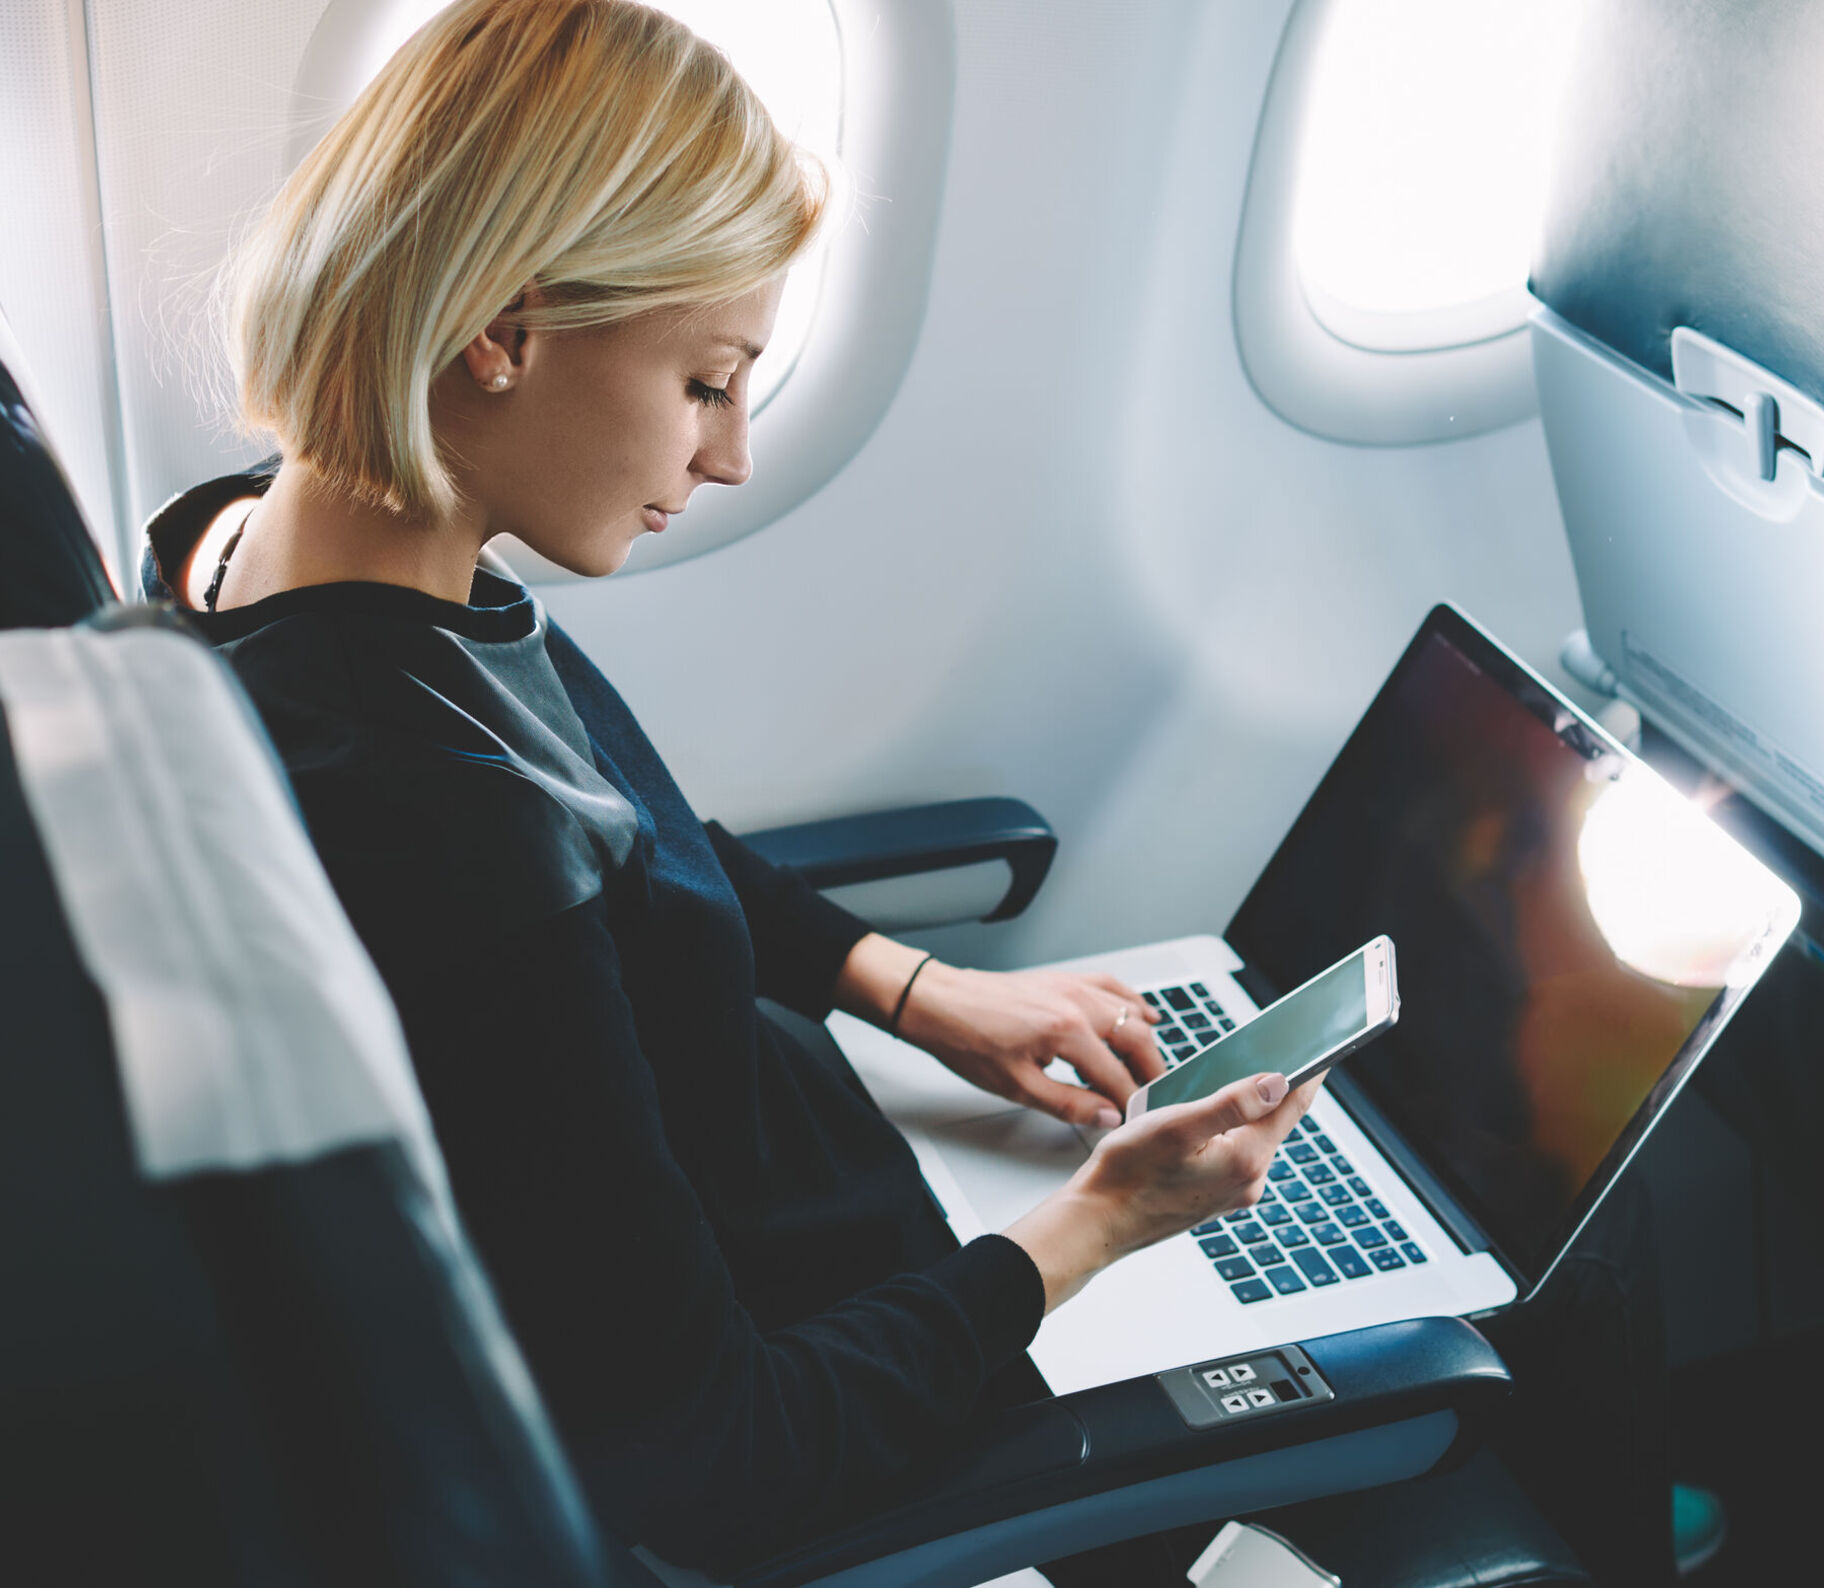 Businesswoman with short haircut sitting in airplane cabin and chatting online on smartphone while checking email on laptop computer with mock up area.Female traveler reading notification on cellular